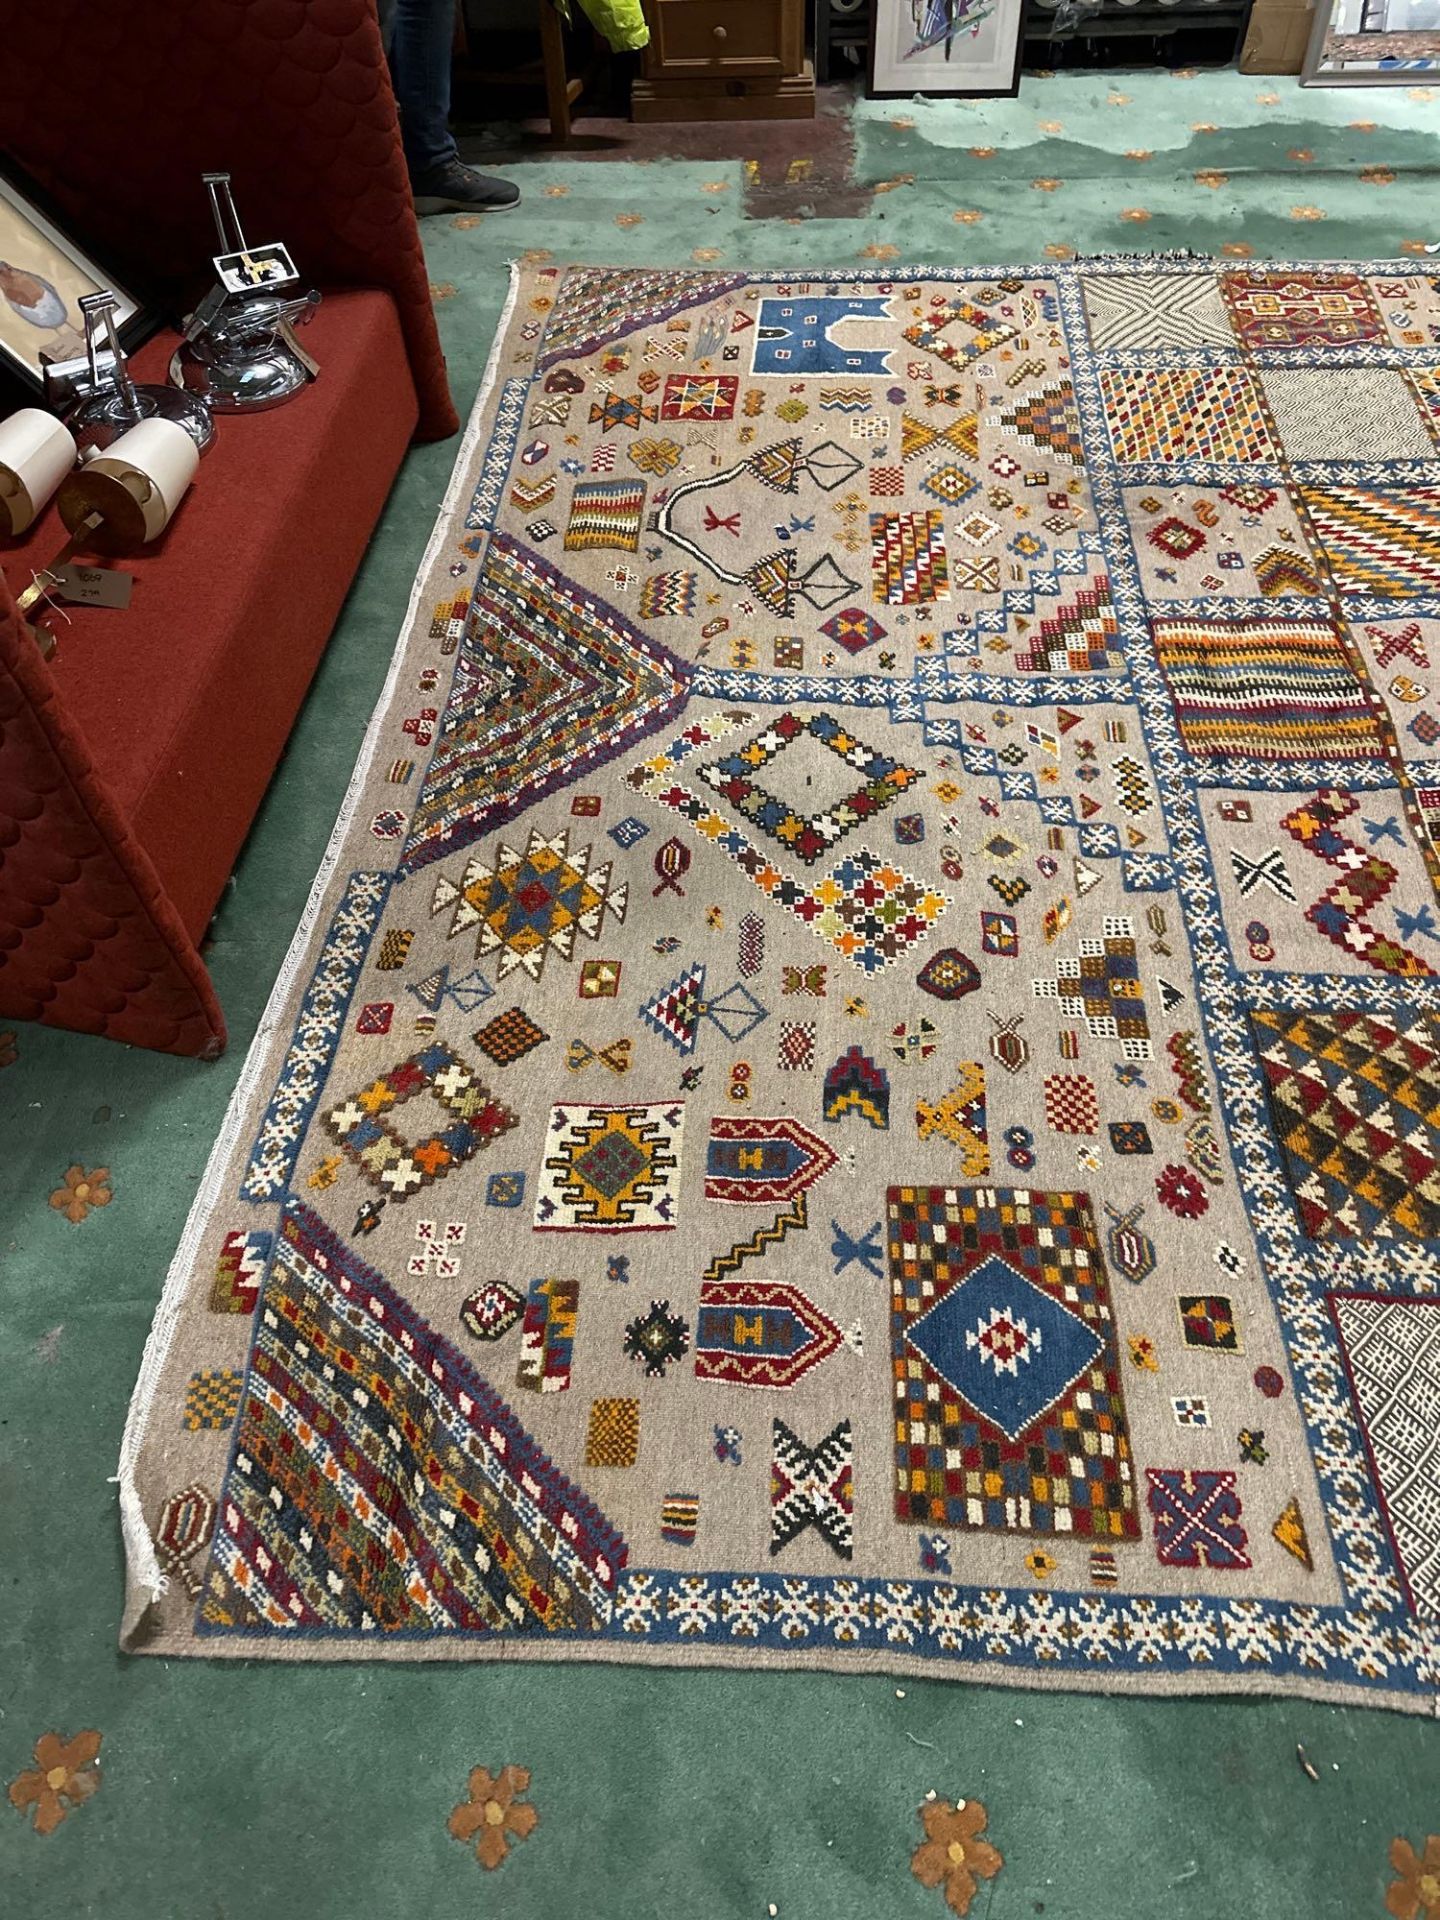 A North African Carpet, Morocco, Wool Pile And Flatweave Mix, On Cotton Foundation .The Grey Field - Image 4 of 5